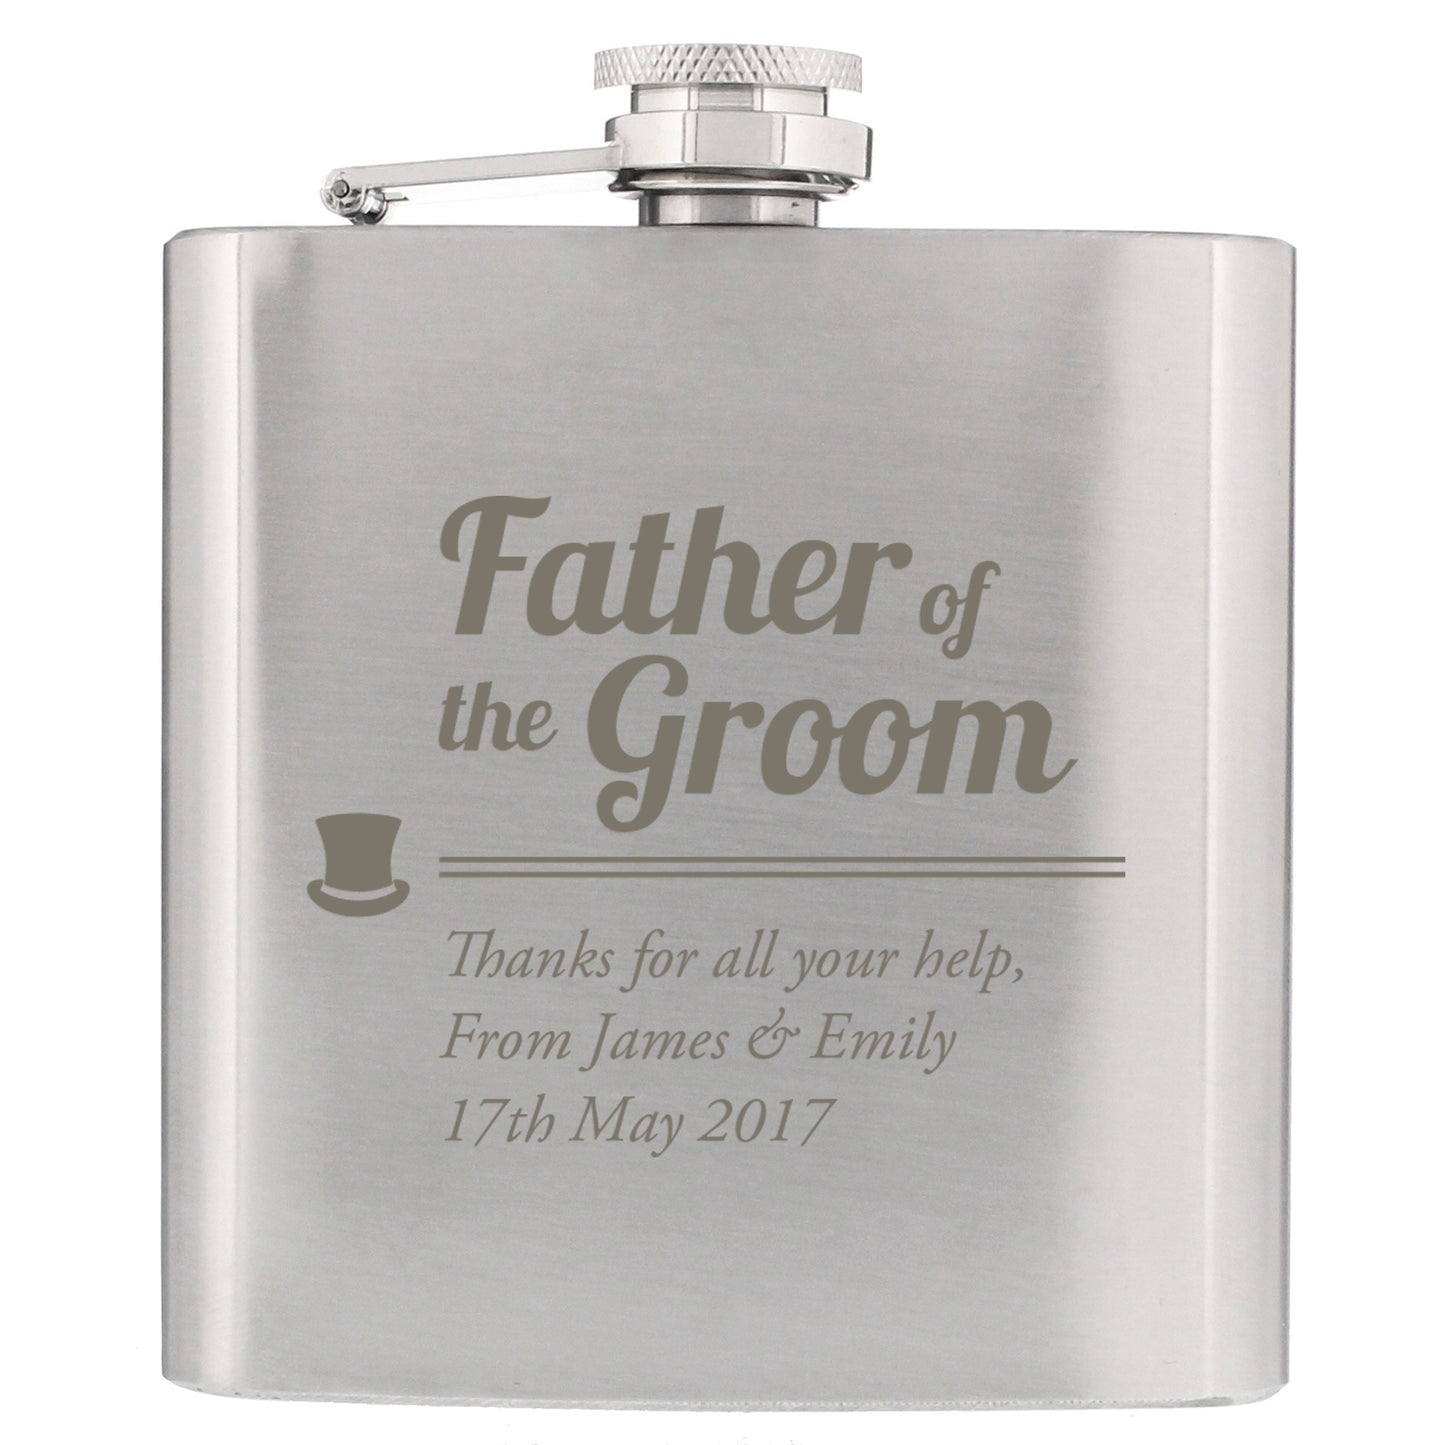 Personalised Father of the Groom Hip Flask - Personalise It!